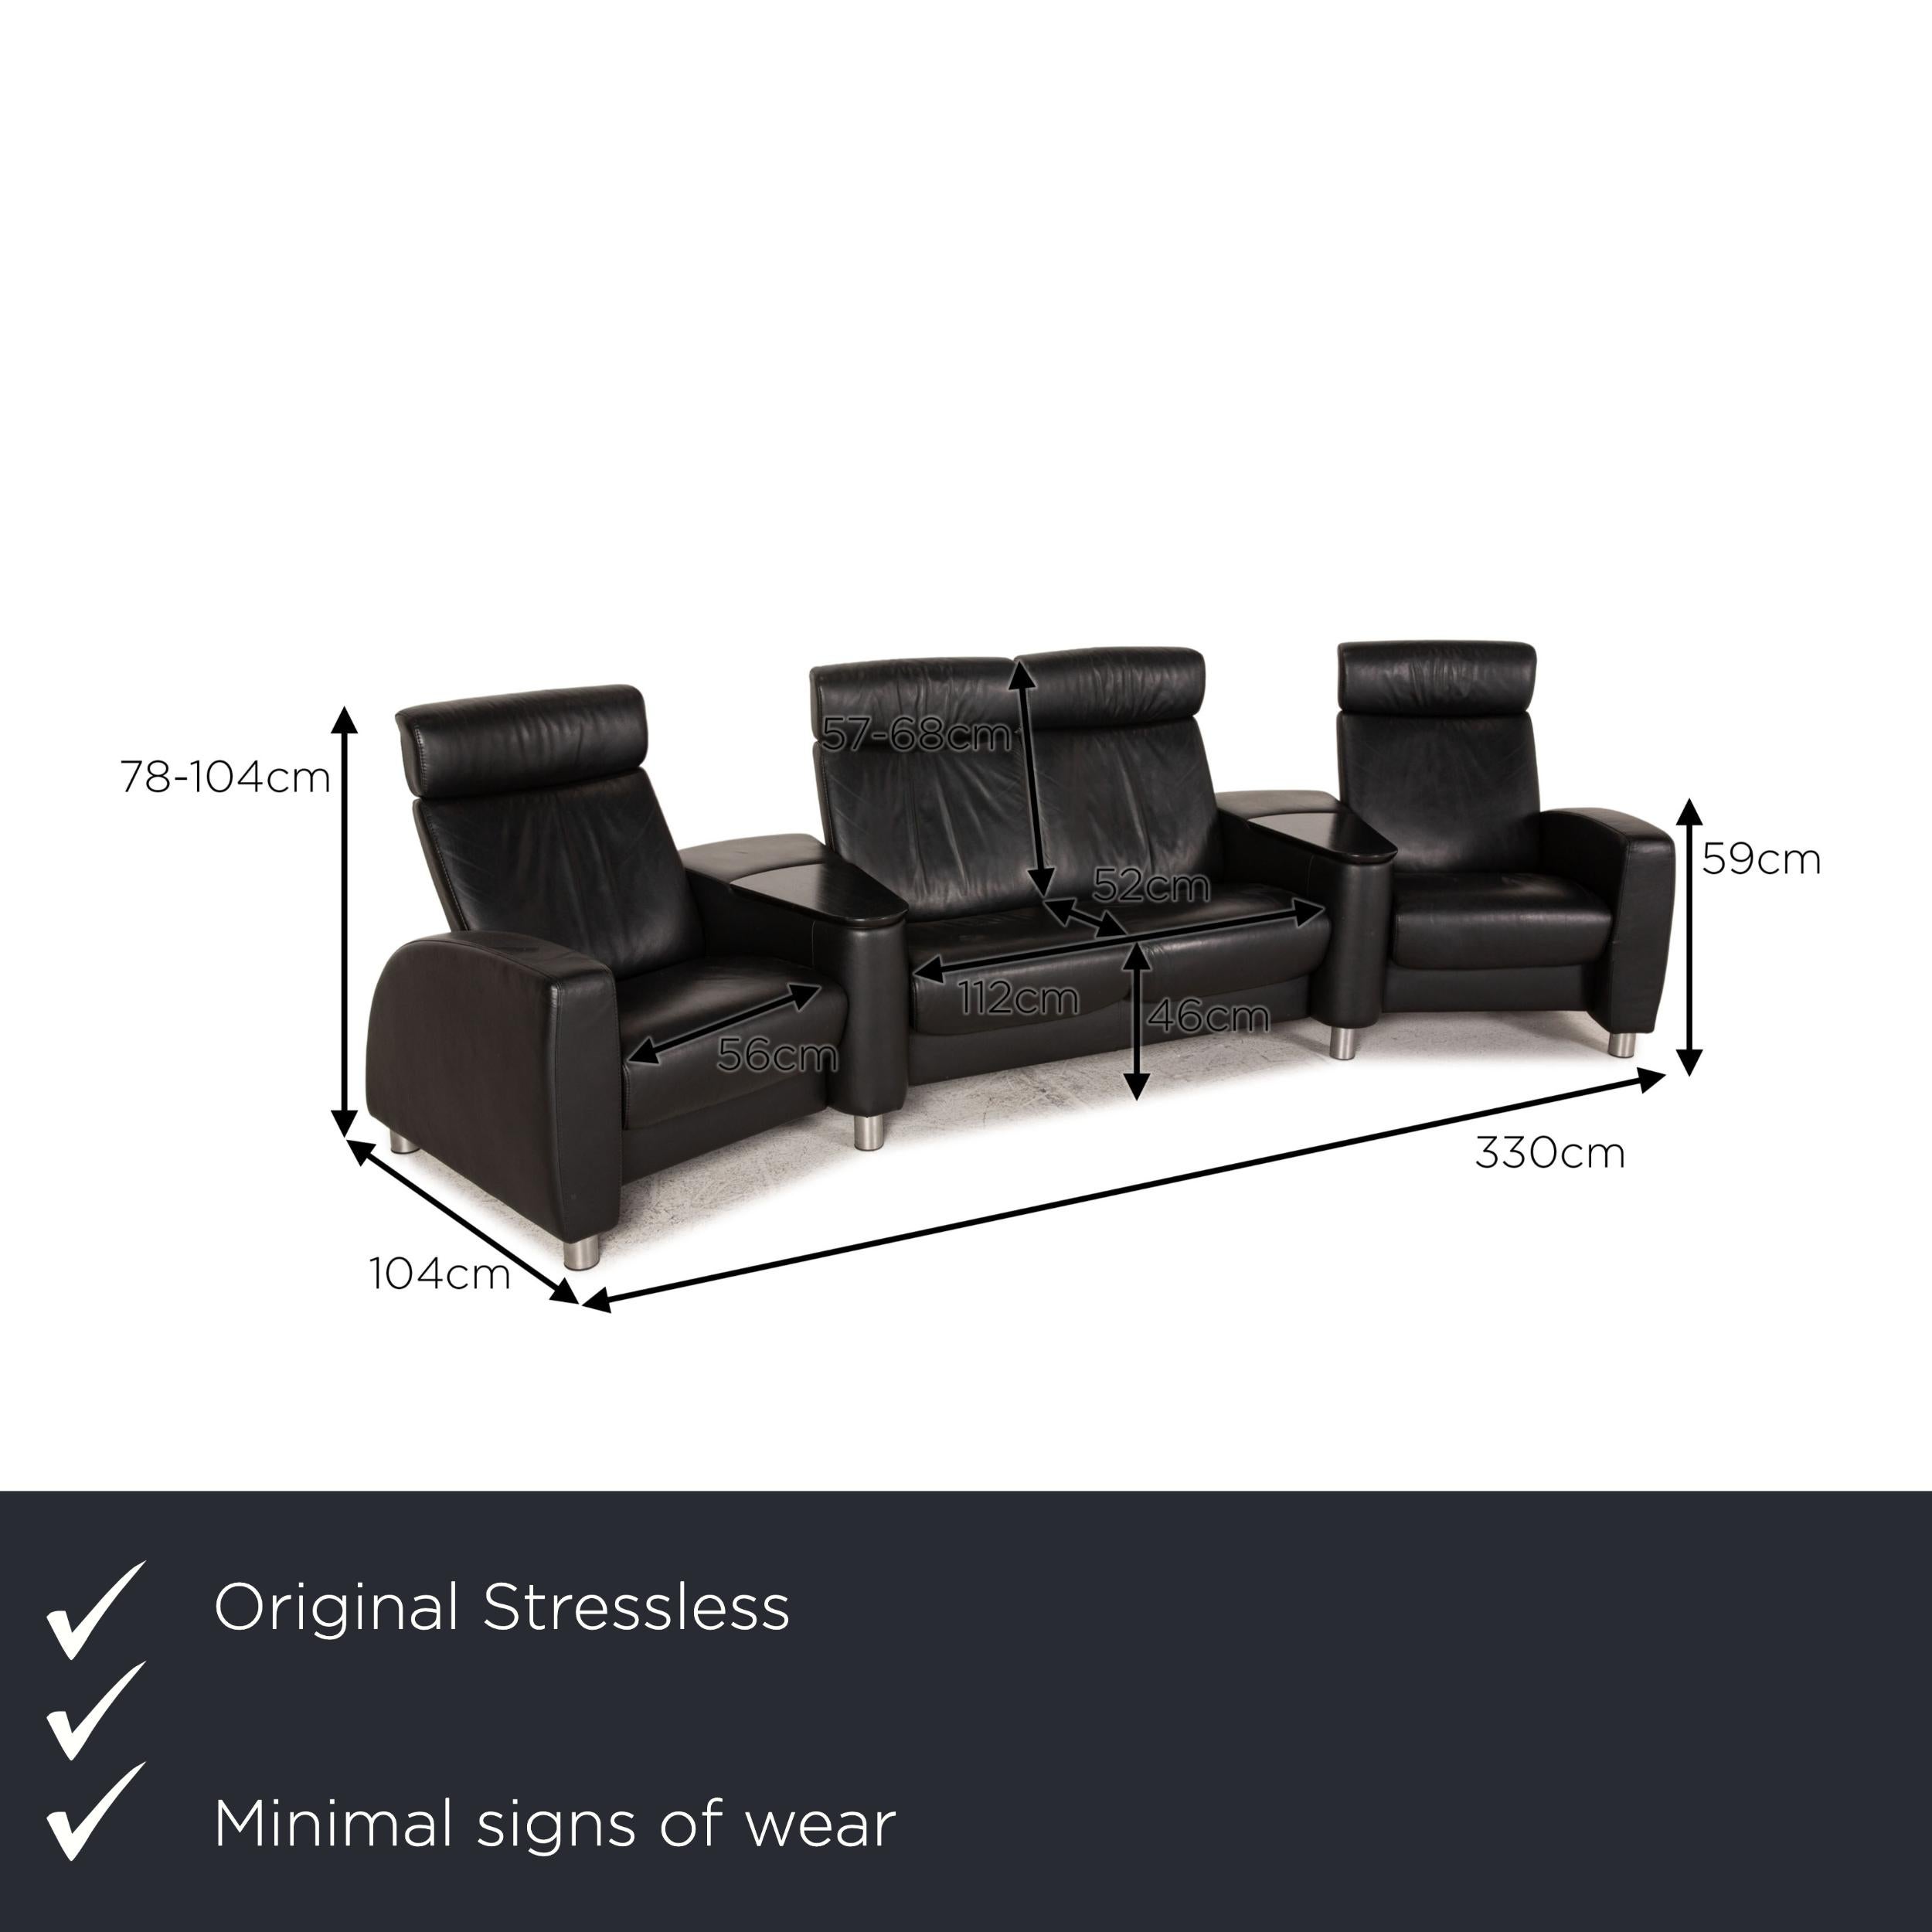 We present to you a stressless Arion leather sofa black four seater couch feature.

Product measurements in centimeters:

depth: 104
width: 330
height: 78
seat height: 46
rest height: 59
seat depth: 52
seat width: 56
back height: 57.
 